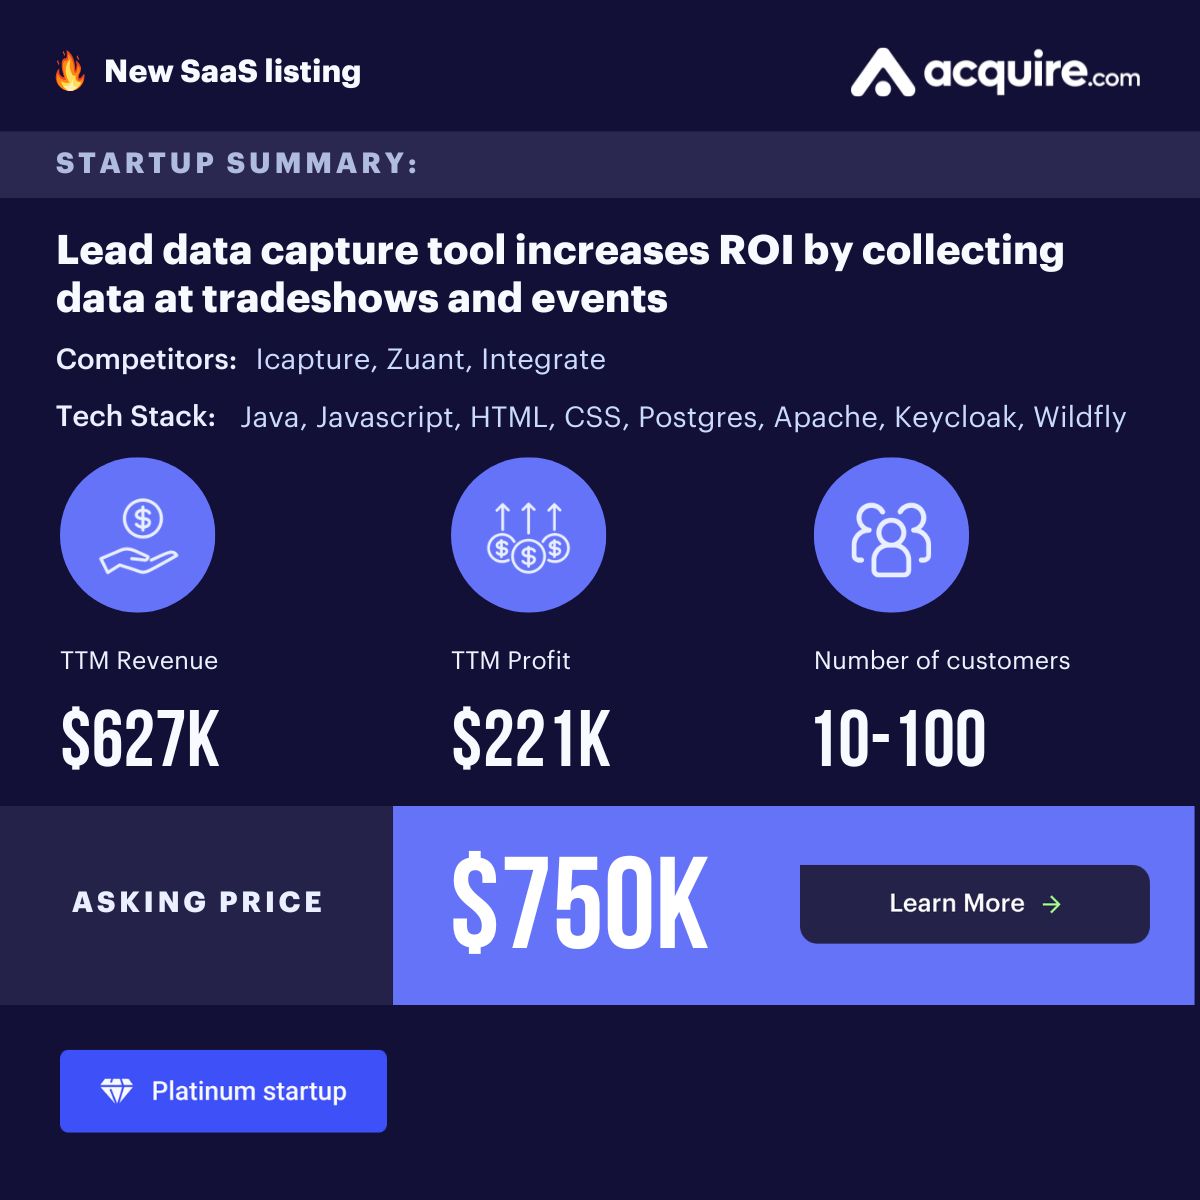 🔥 New GBA Startup Listed 🔥 SaaS | Lead data capture tool increases ROI by collecting data at tradeshows and events | $627k TTM revenue Asking Price: $750k Contact the seller here: buff.ly/3Qx6d7r